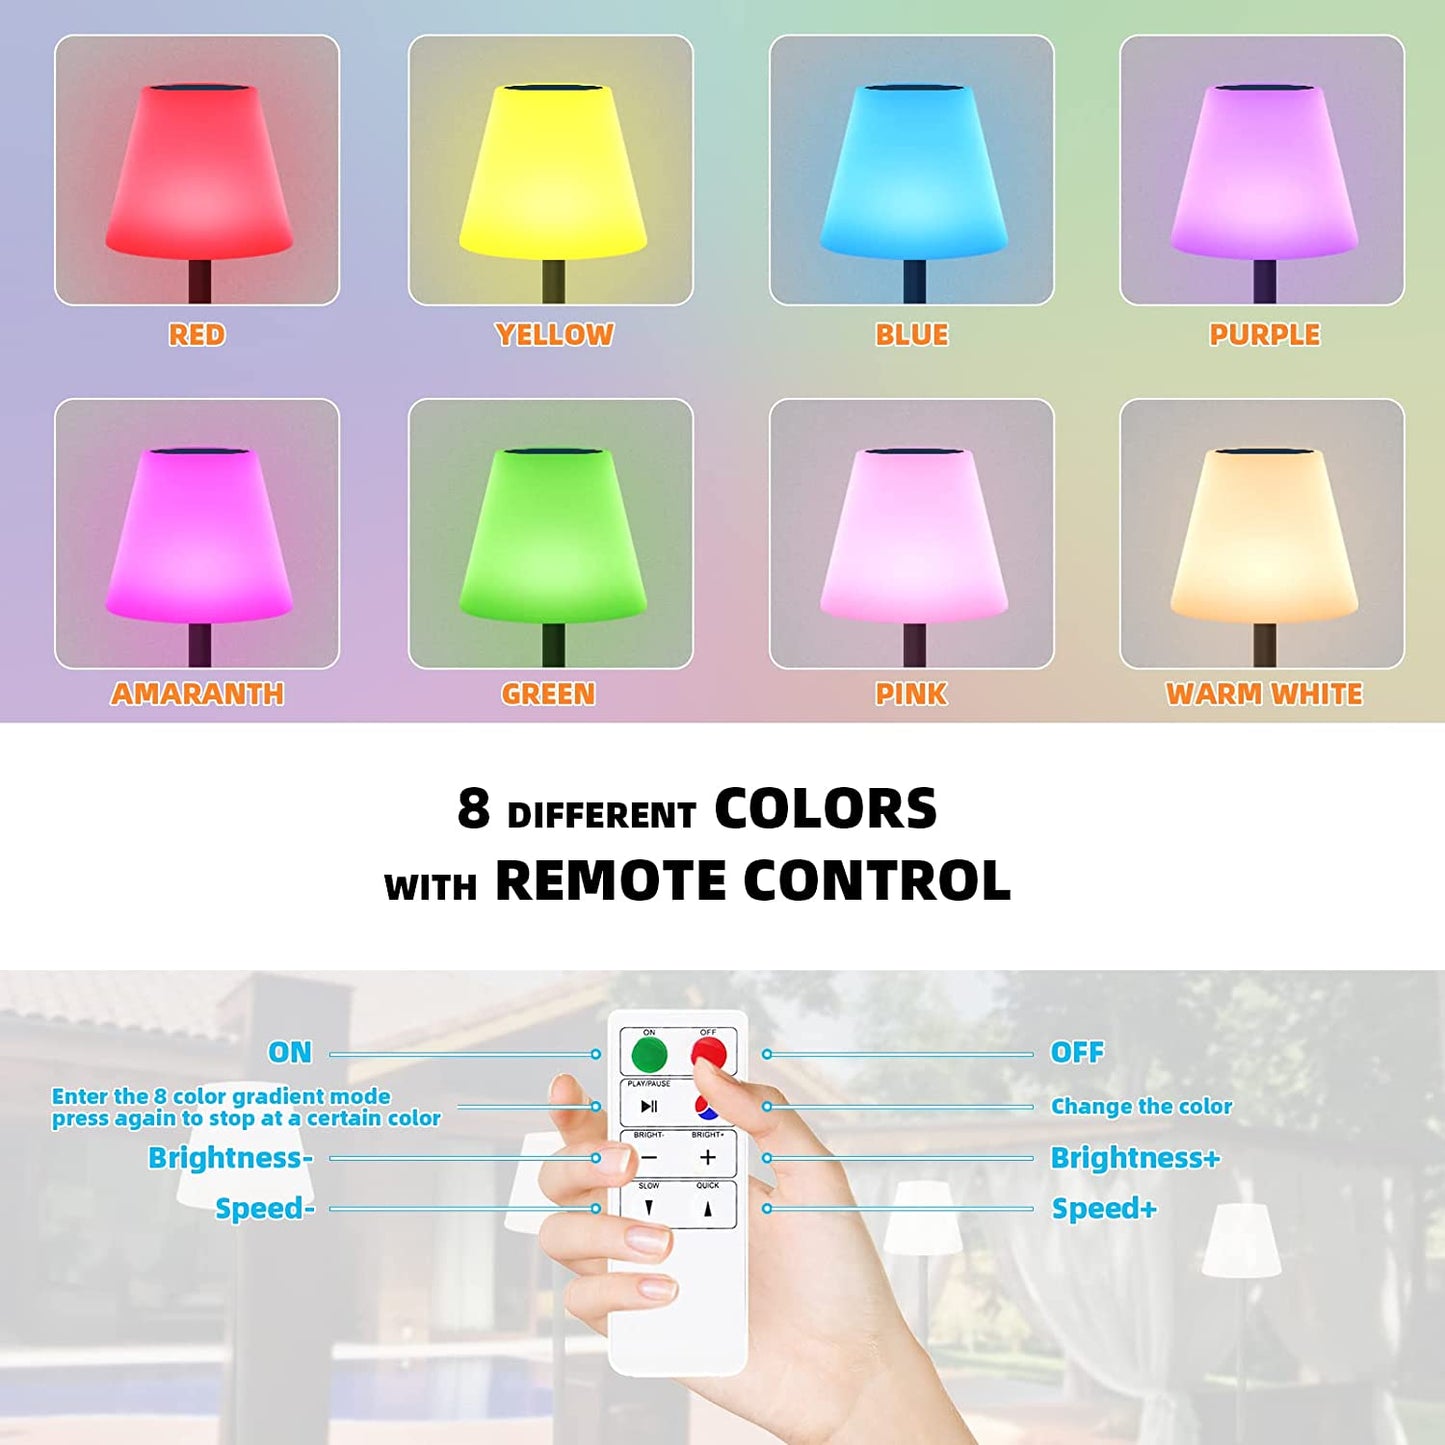 Outdoor Solar Floor Lamp Cordless, IP65 Waterproof RGB Colorful Dimmable with Remote Control, USB Rechargeable and Light Sensor, Height Adjustable with Metal Stable Base for Patio Lawn Yard Porch